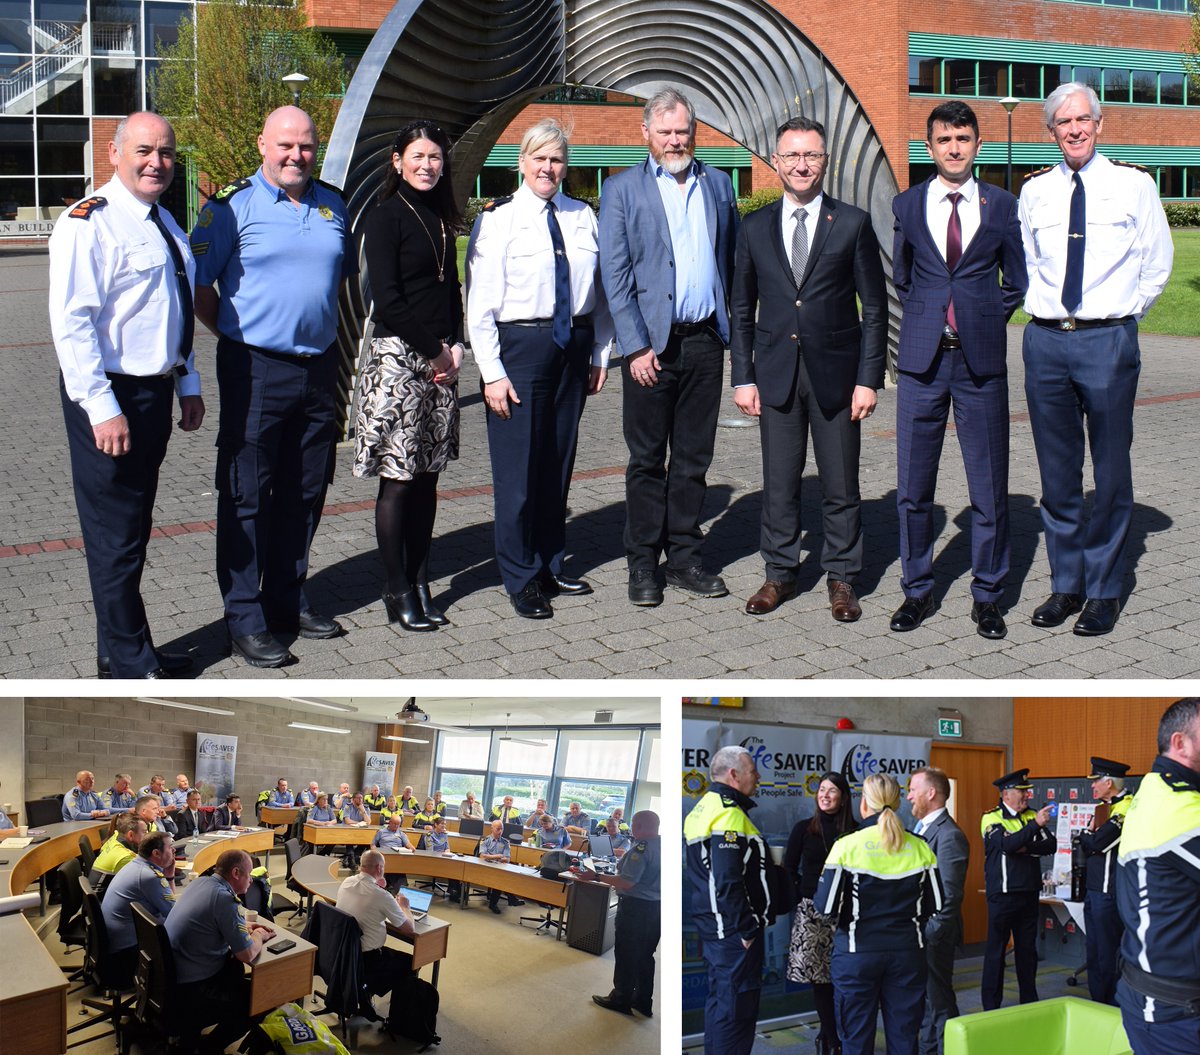 In attendance at UL's STRONGER TOGETHER SAFETY SEMINAR were Chief Supt. Zeki BAL & Supt. Ali ARIK - Turkish Police, Manager at the @WHO - Jonathan Passmore, Asst. Commissioner Paula Hillman, Chief Supt. Derek Smart, Supt. Andrew Lacey, Sgt. Tony Miniter & Dr. Christina O’Connor